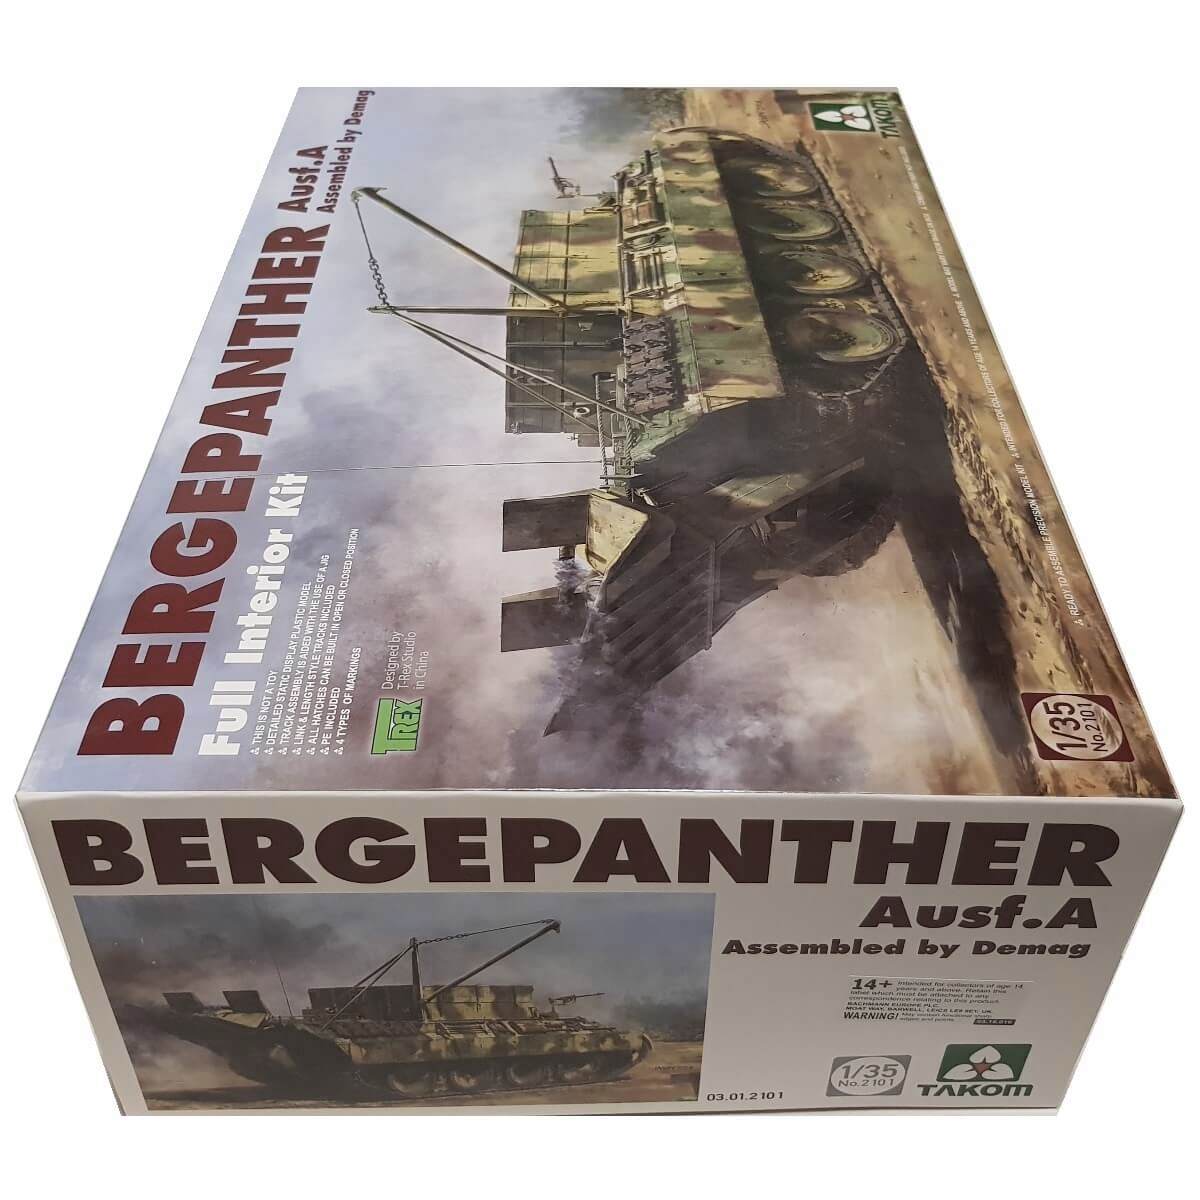 1:35 Bergepanther Ausf. A Assembled by Demag - TAKOM